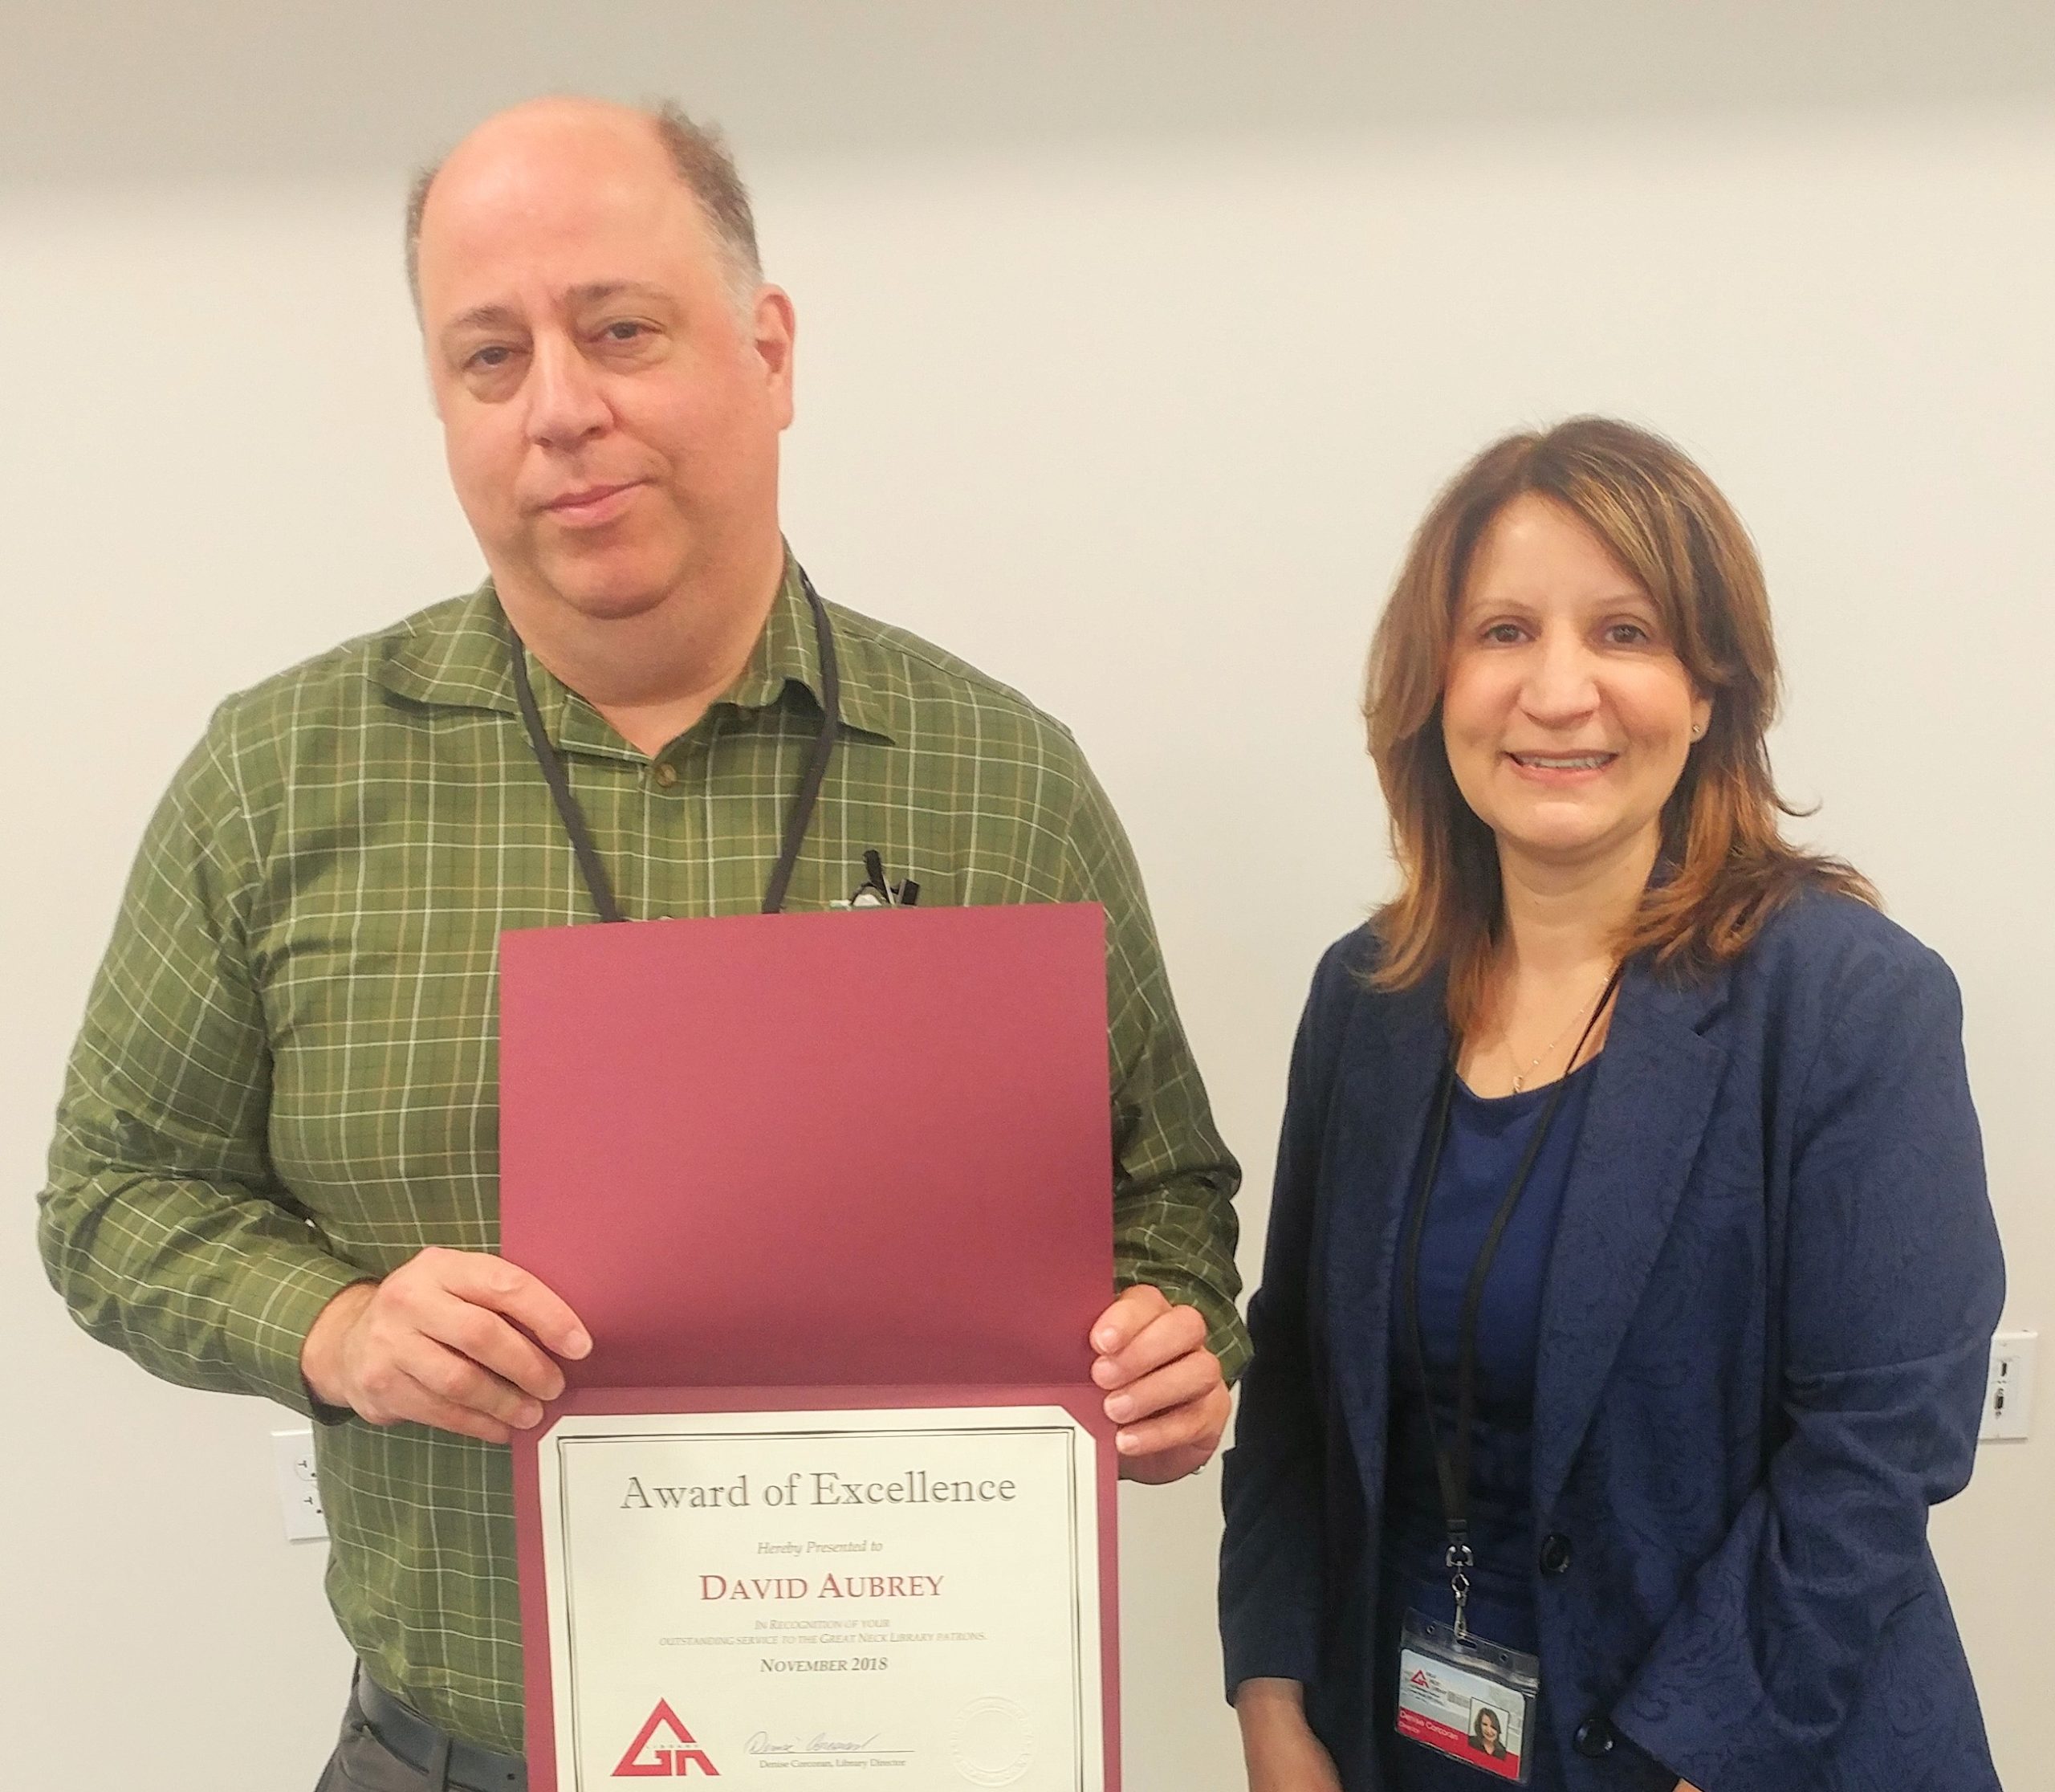 David Aubrey receives the Great Neck Library Staff Excellence Award for November 2018 from Library Director Denise Corcoran. (Photo courtesy of the Great Neck Library)